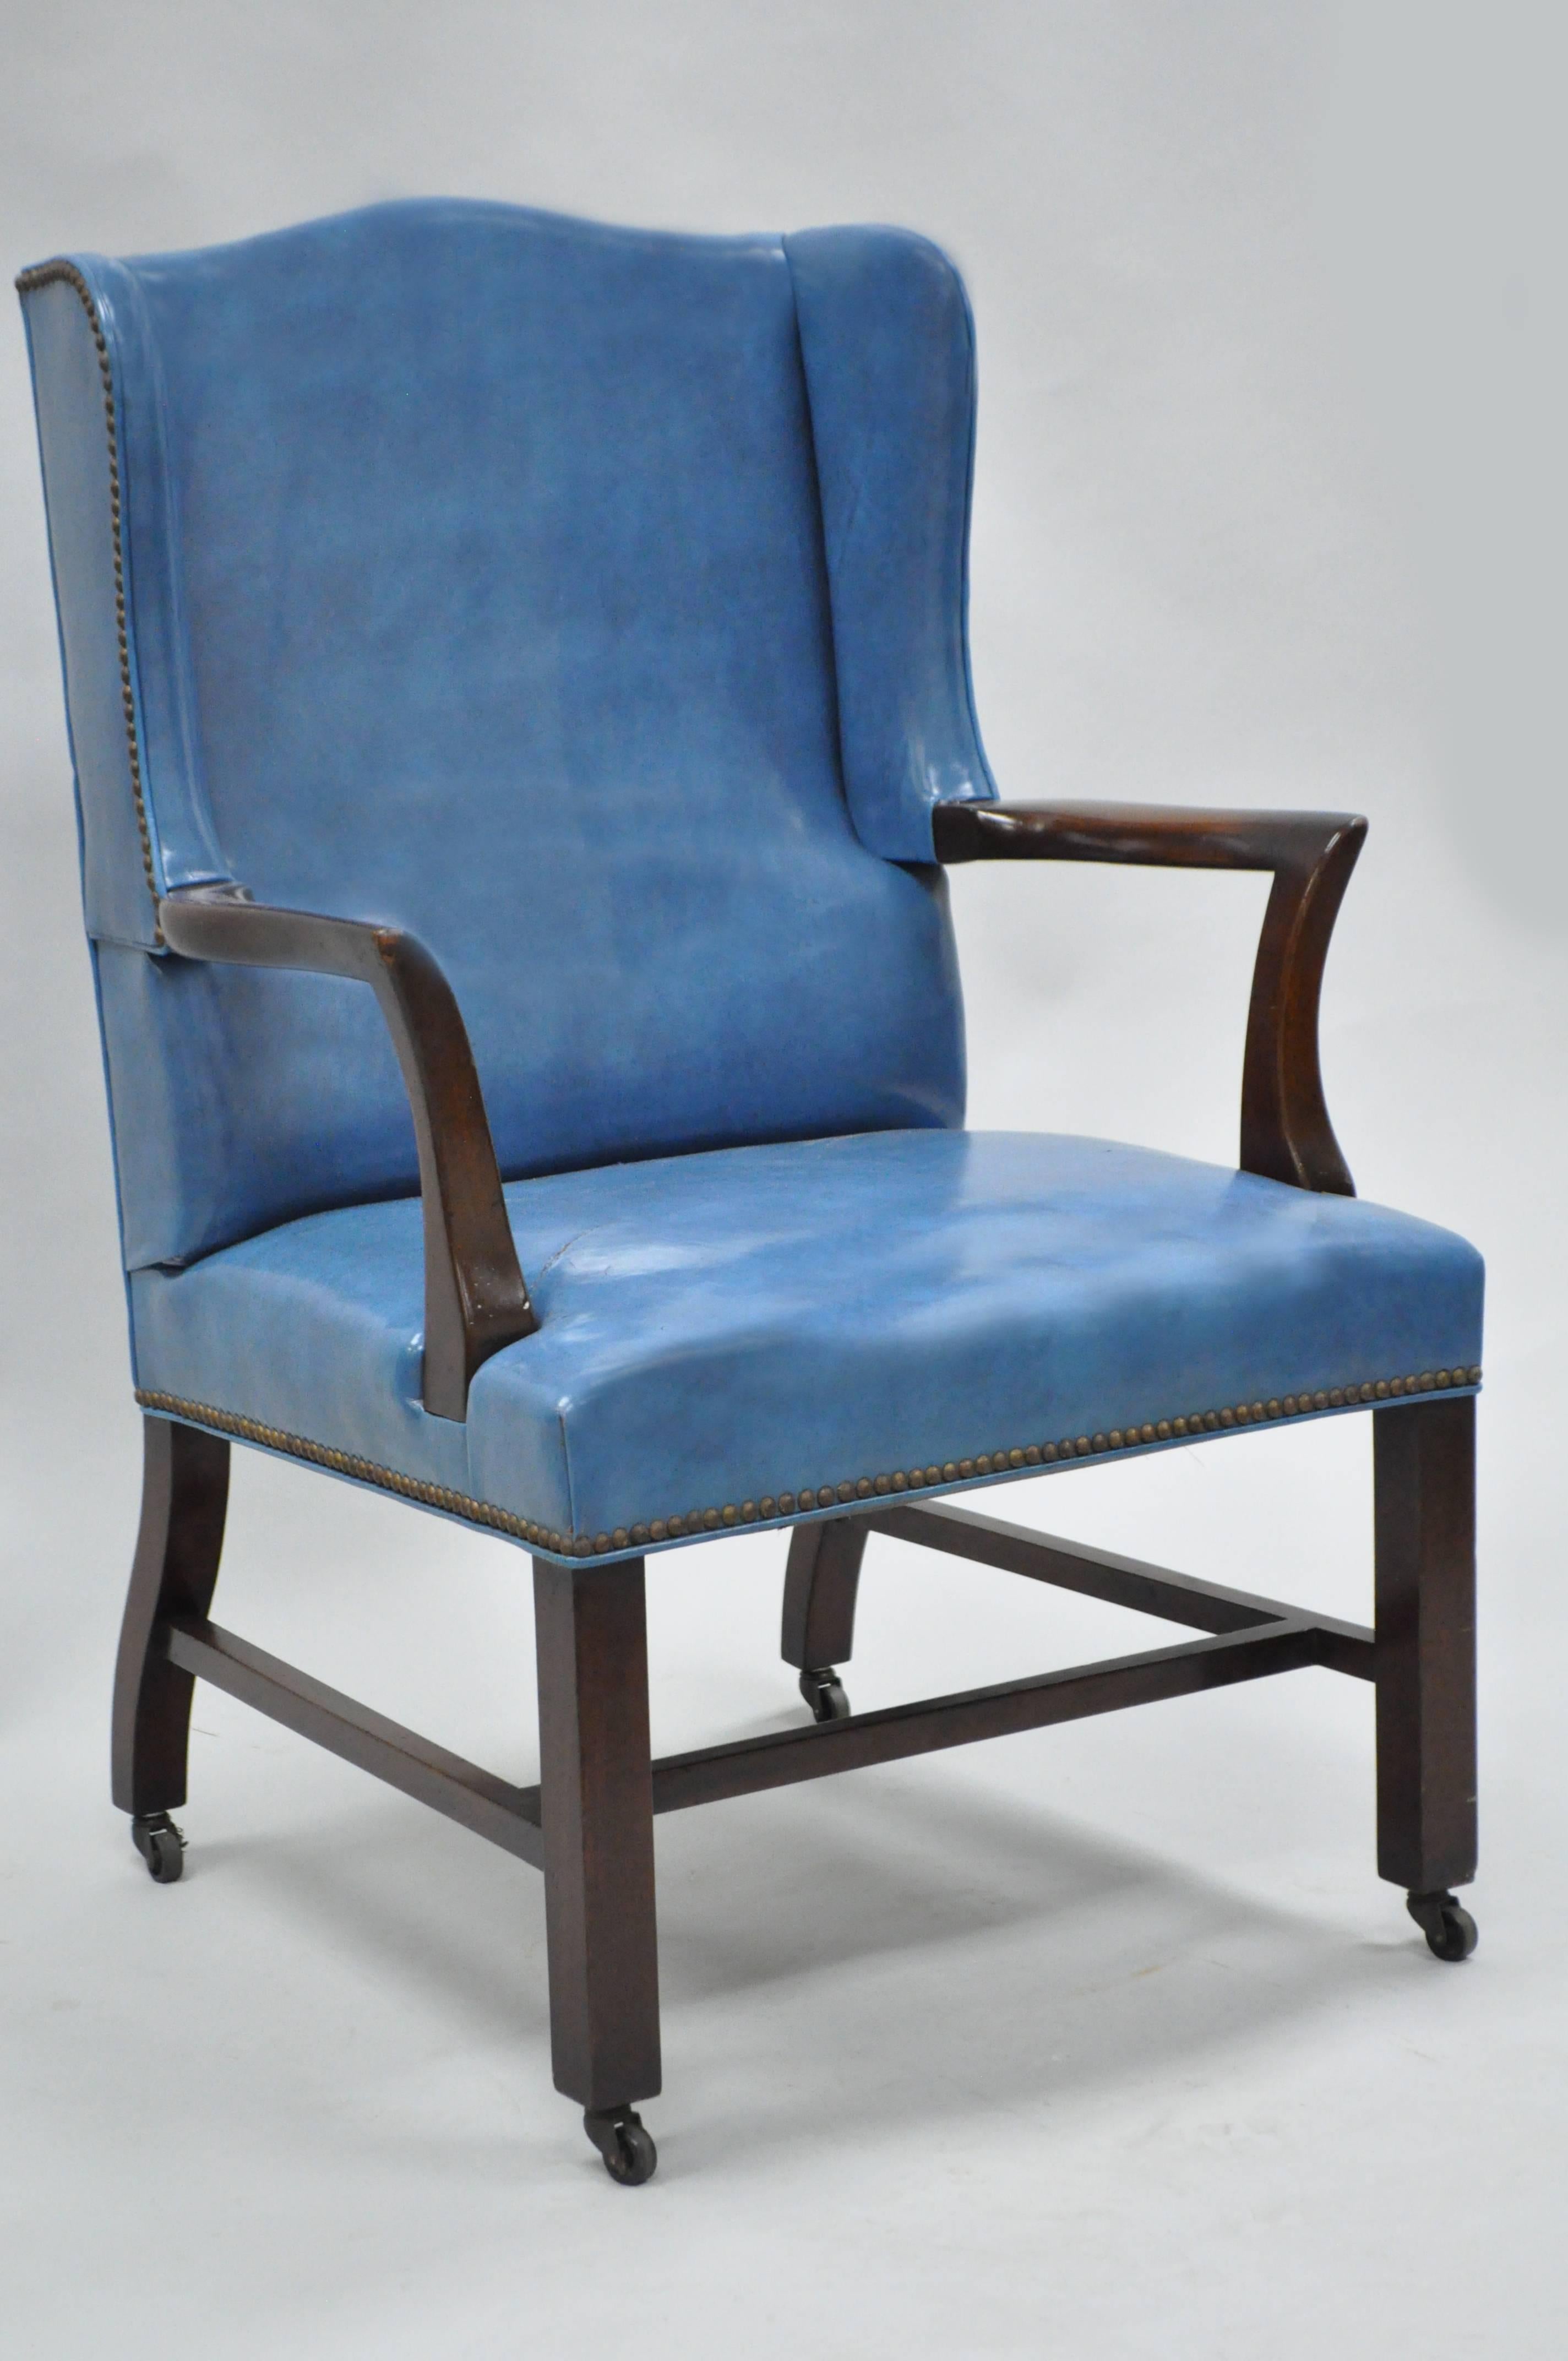 Remarkable quality mid-20th century blue leather English style library desk armchair on Casters by W&J Sloane; New York, NY in the manner of Edward Wormley. This executive chair features a heavy solid mahogany wingback frame, original blue leather